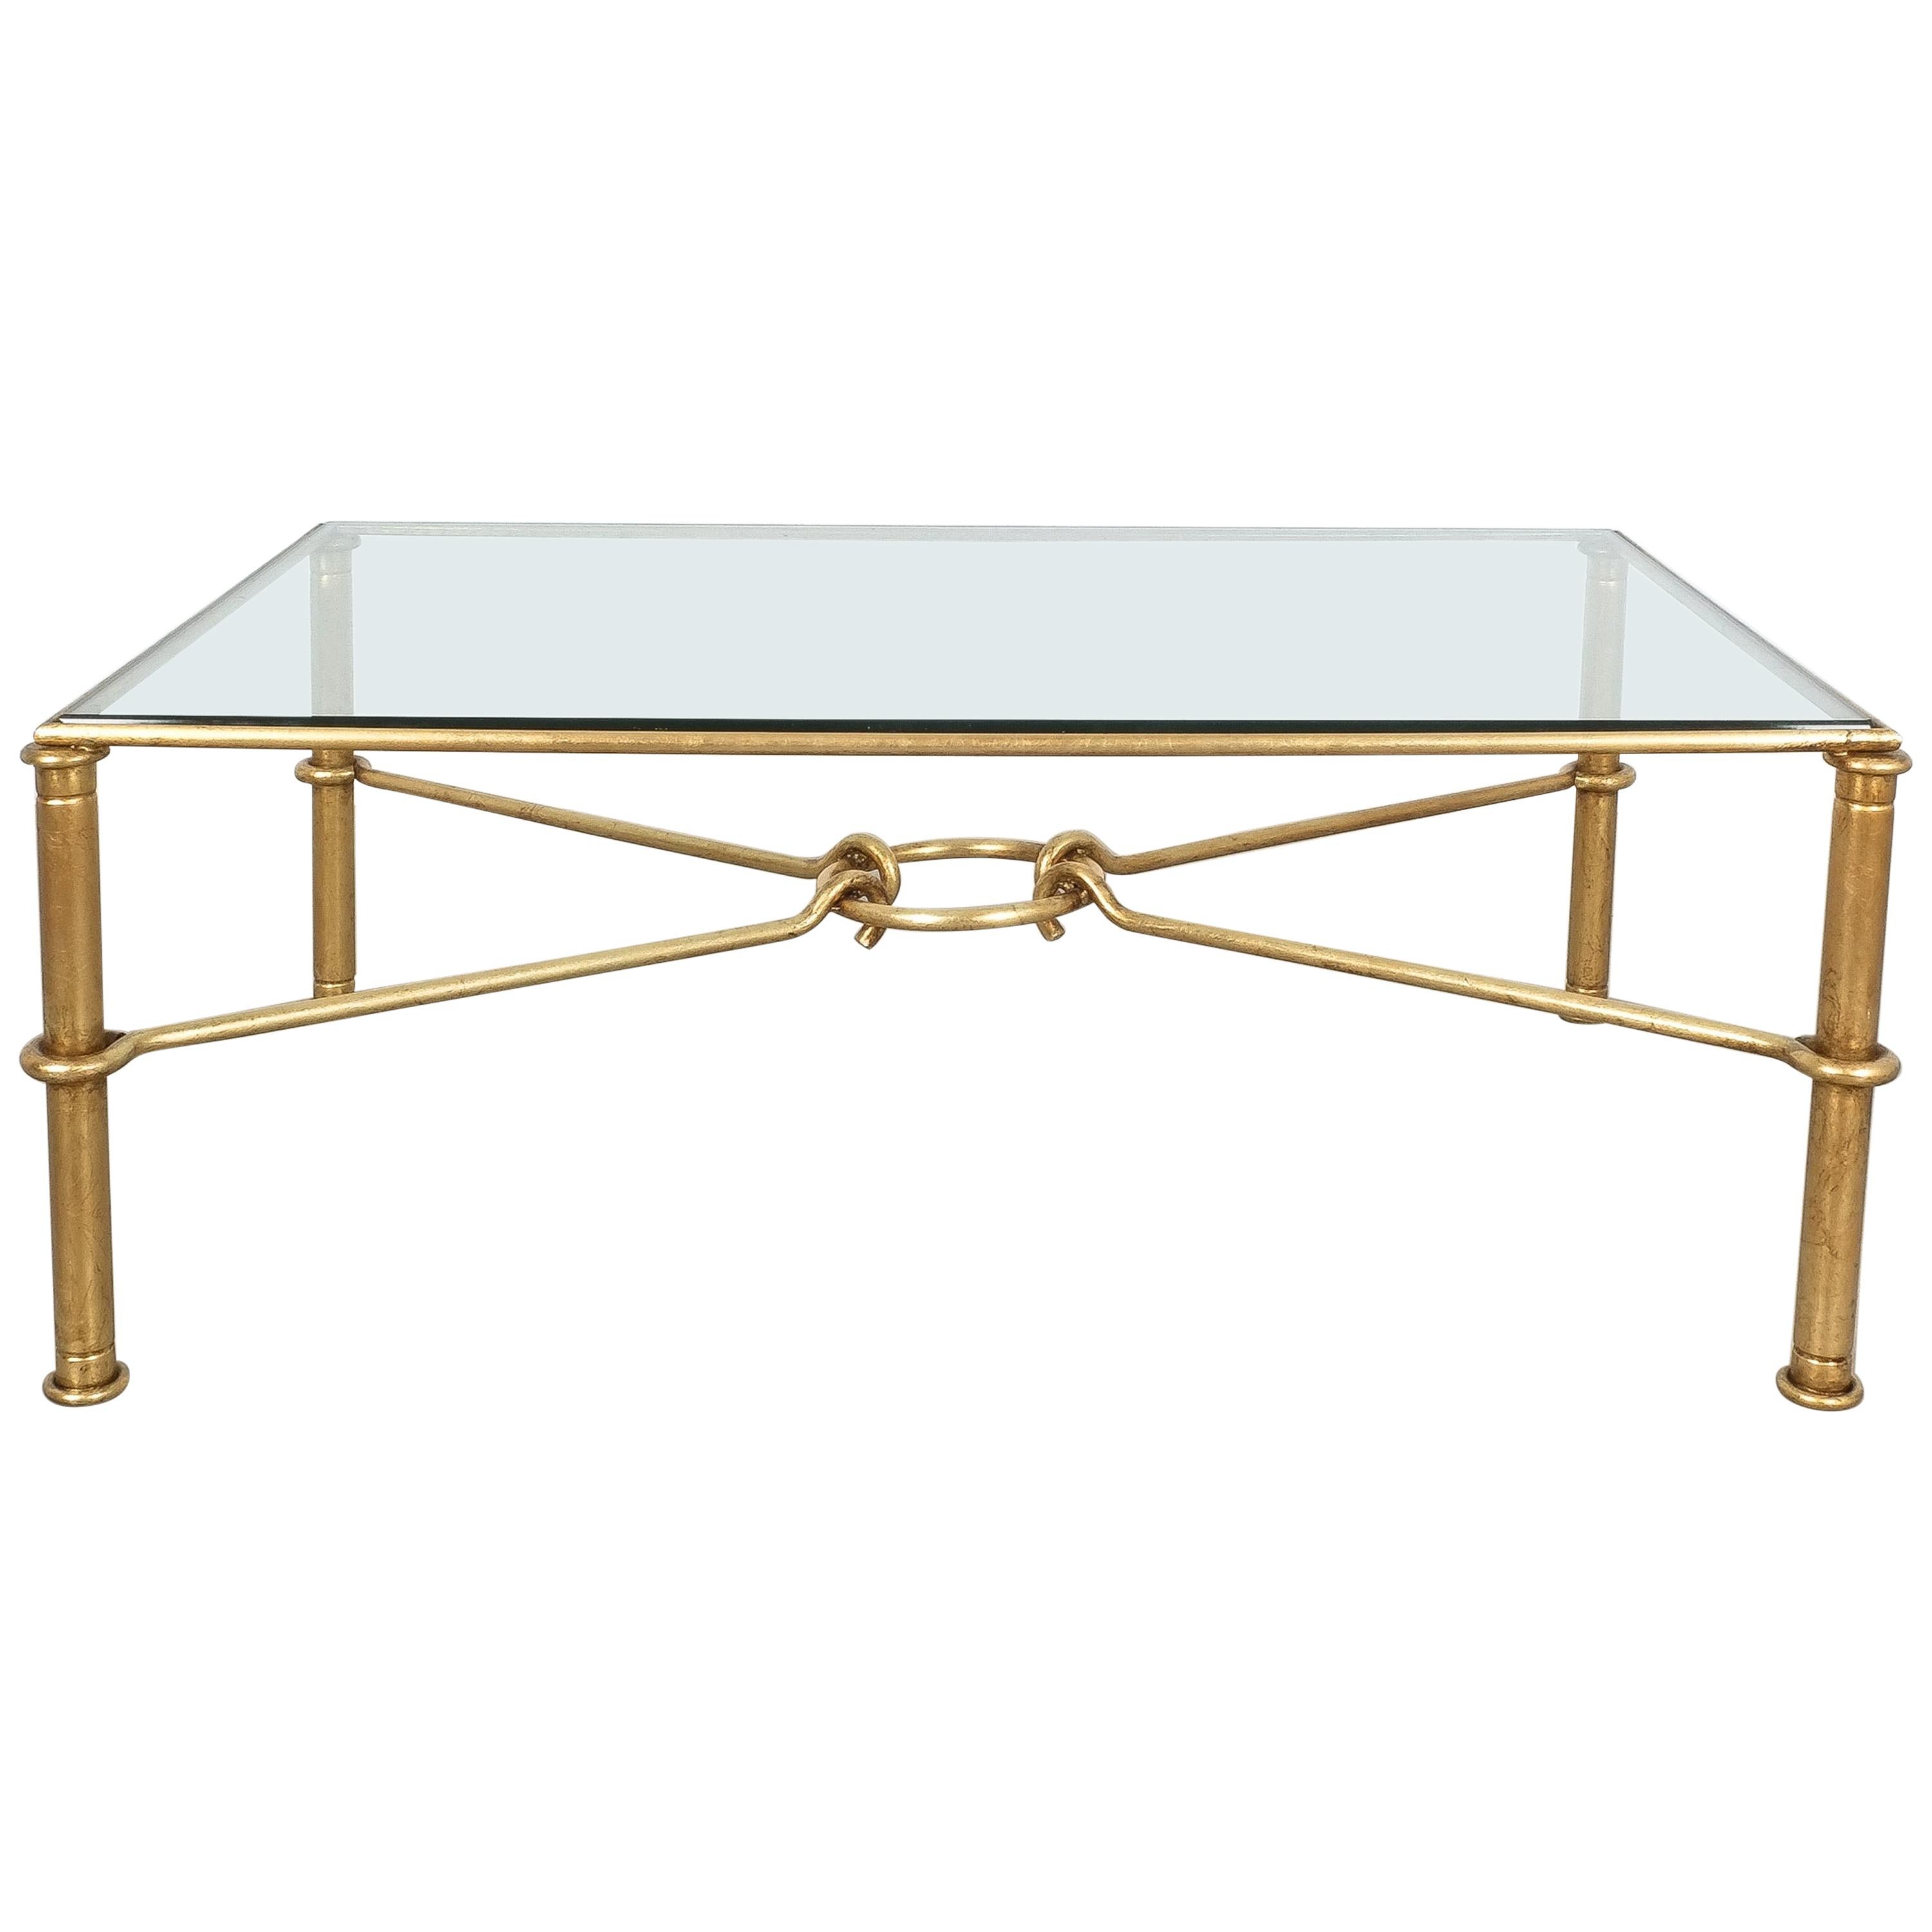 Large Gilt Iron Coffee Table Giovanni Banci for Hermes, Italy, Midcentury